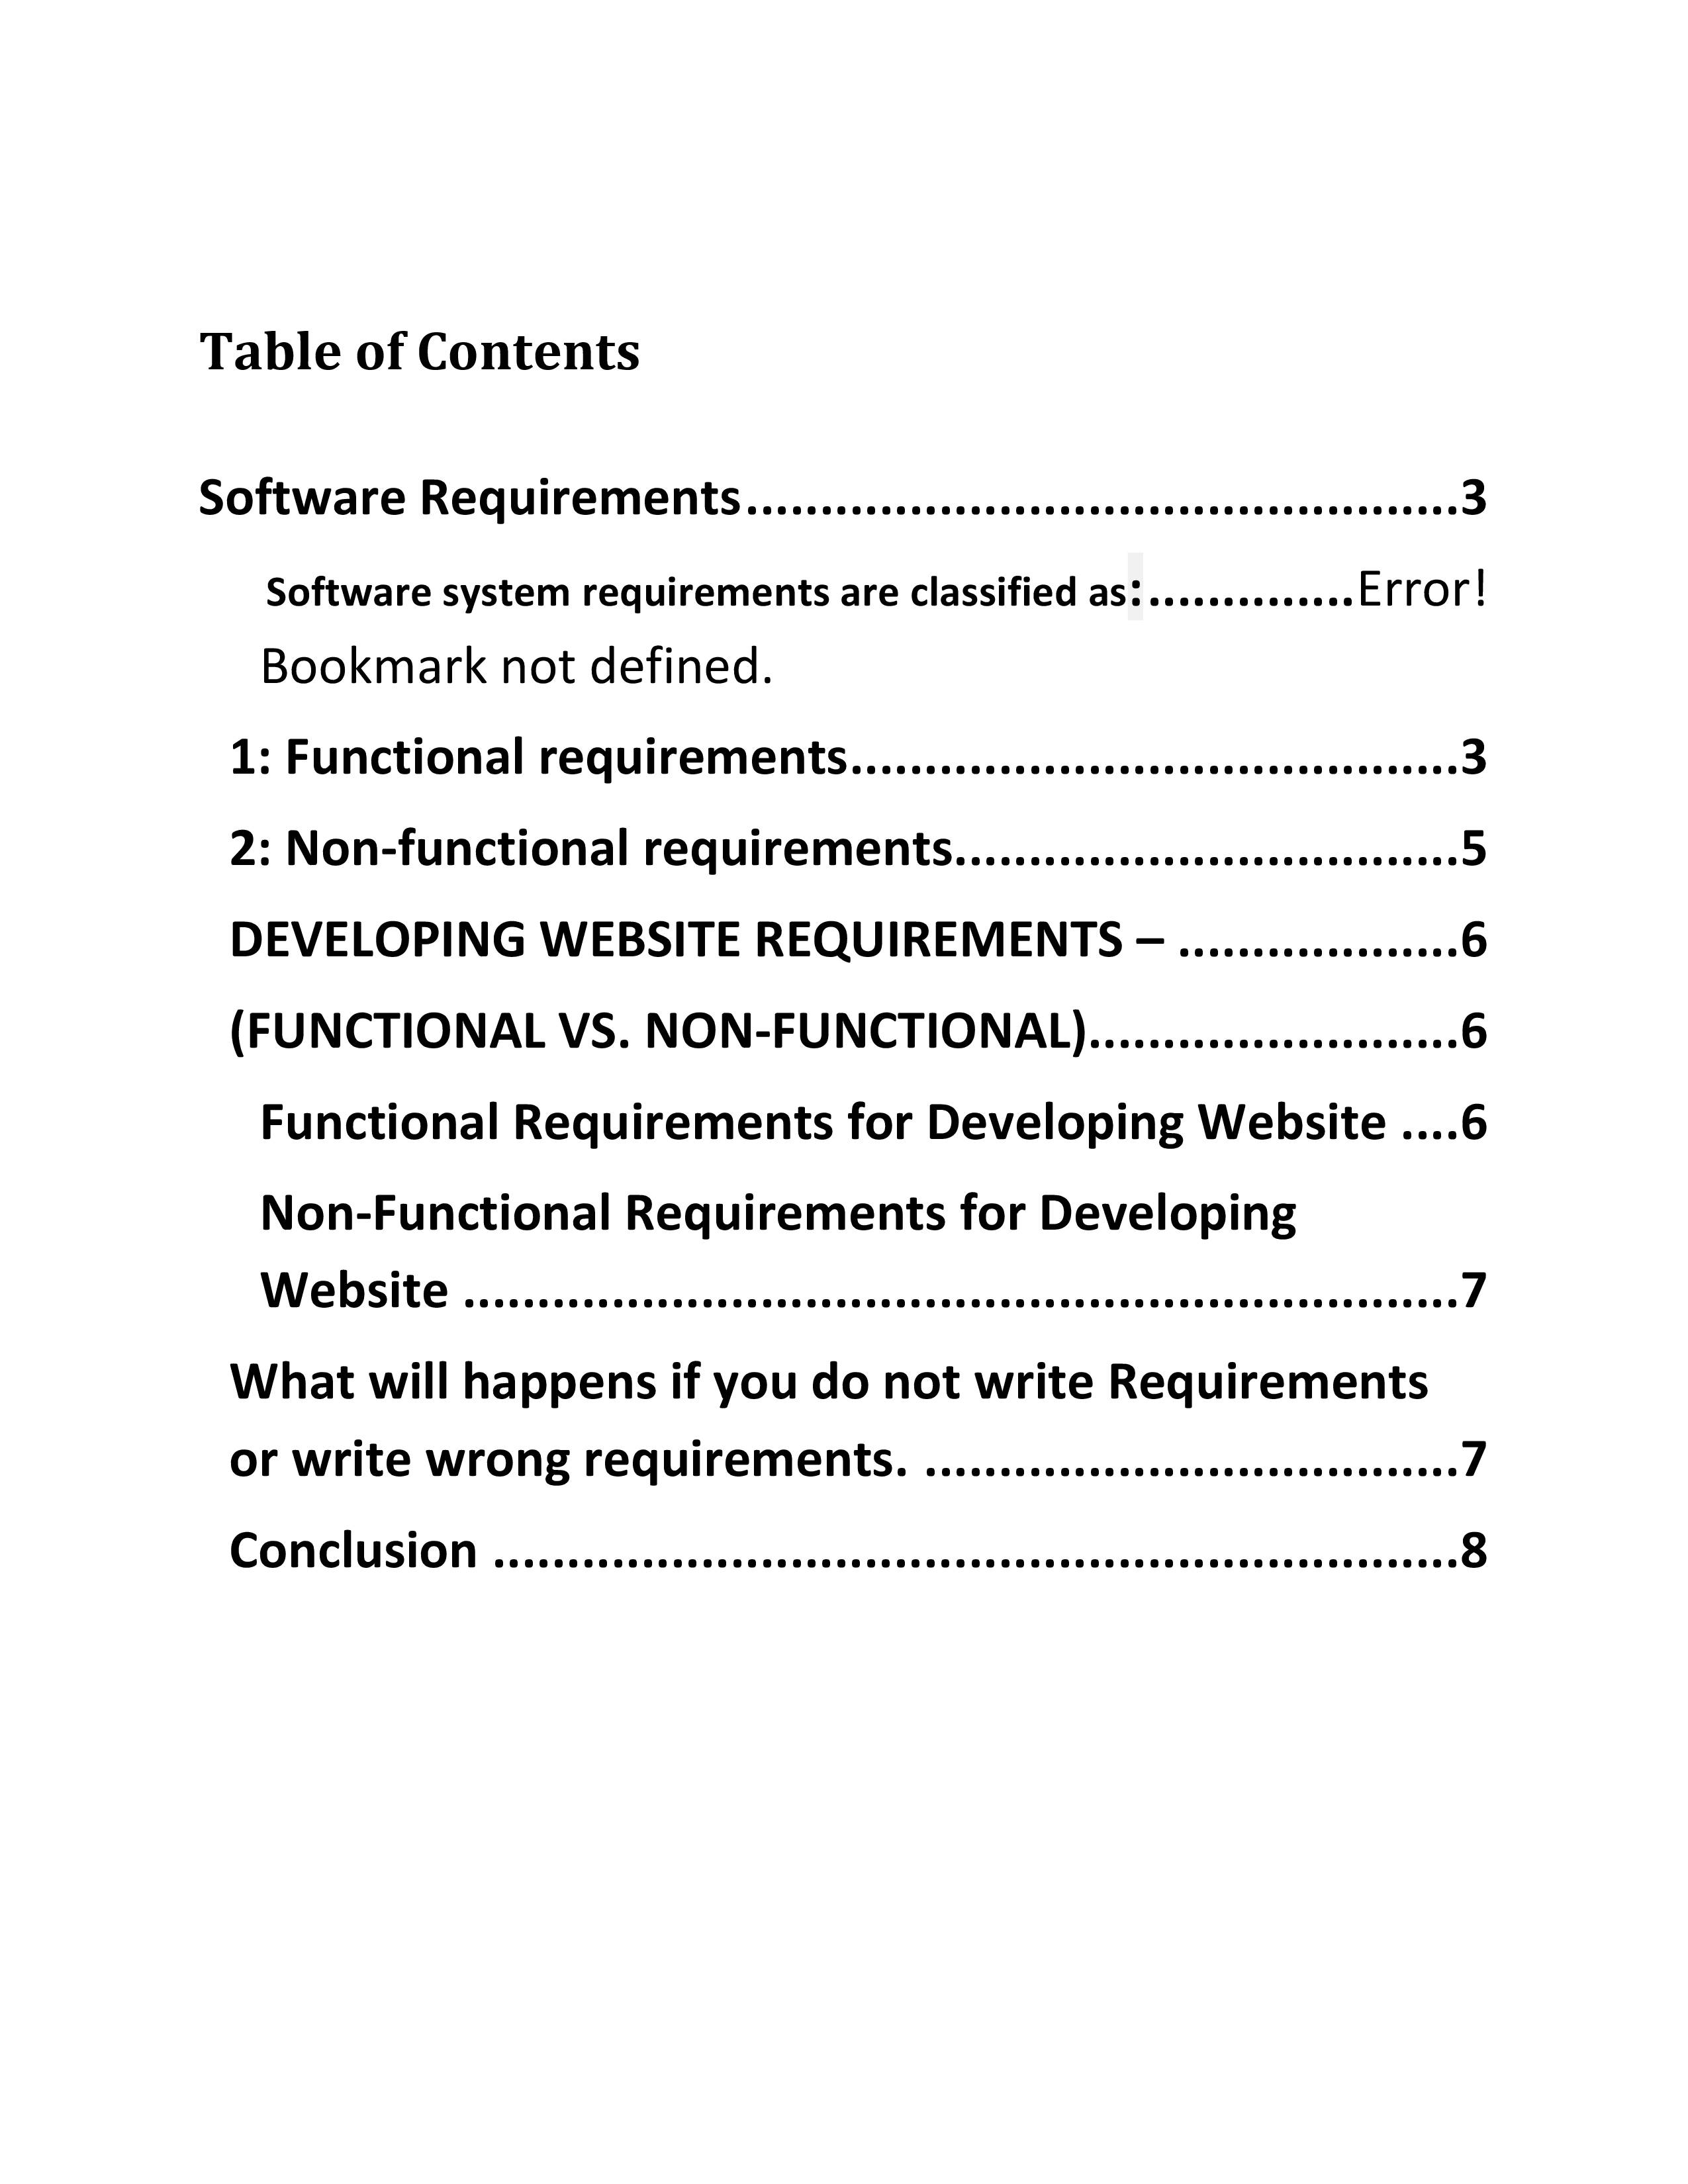 Functional And Non Functional Requirements - Notes